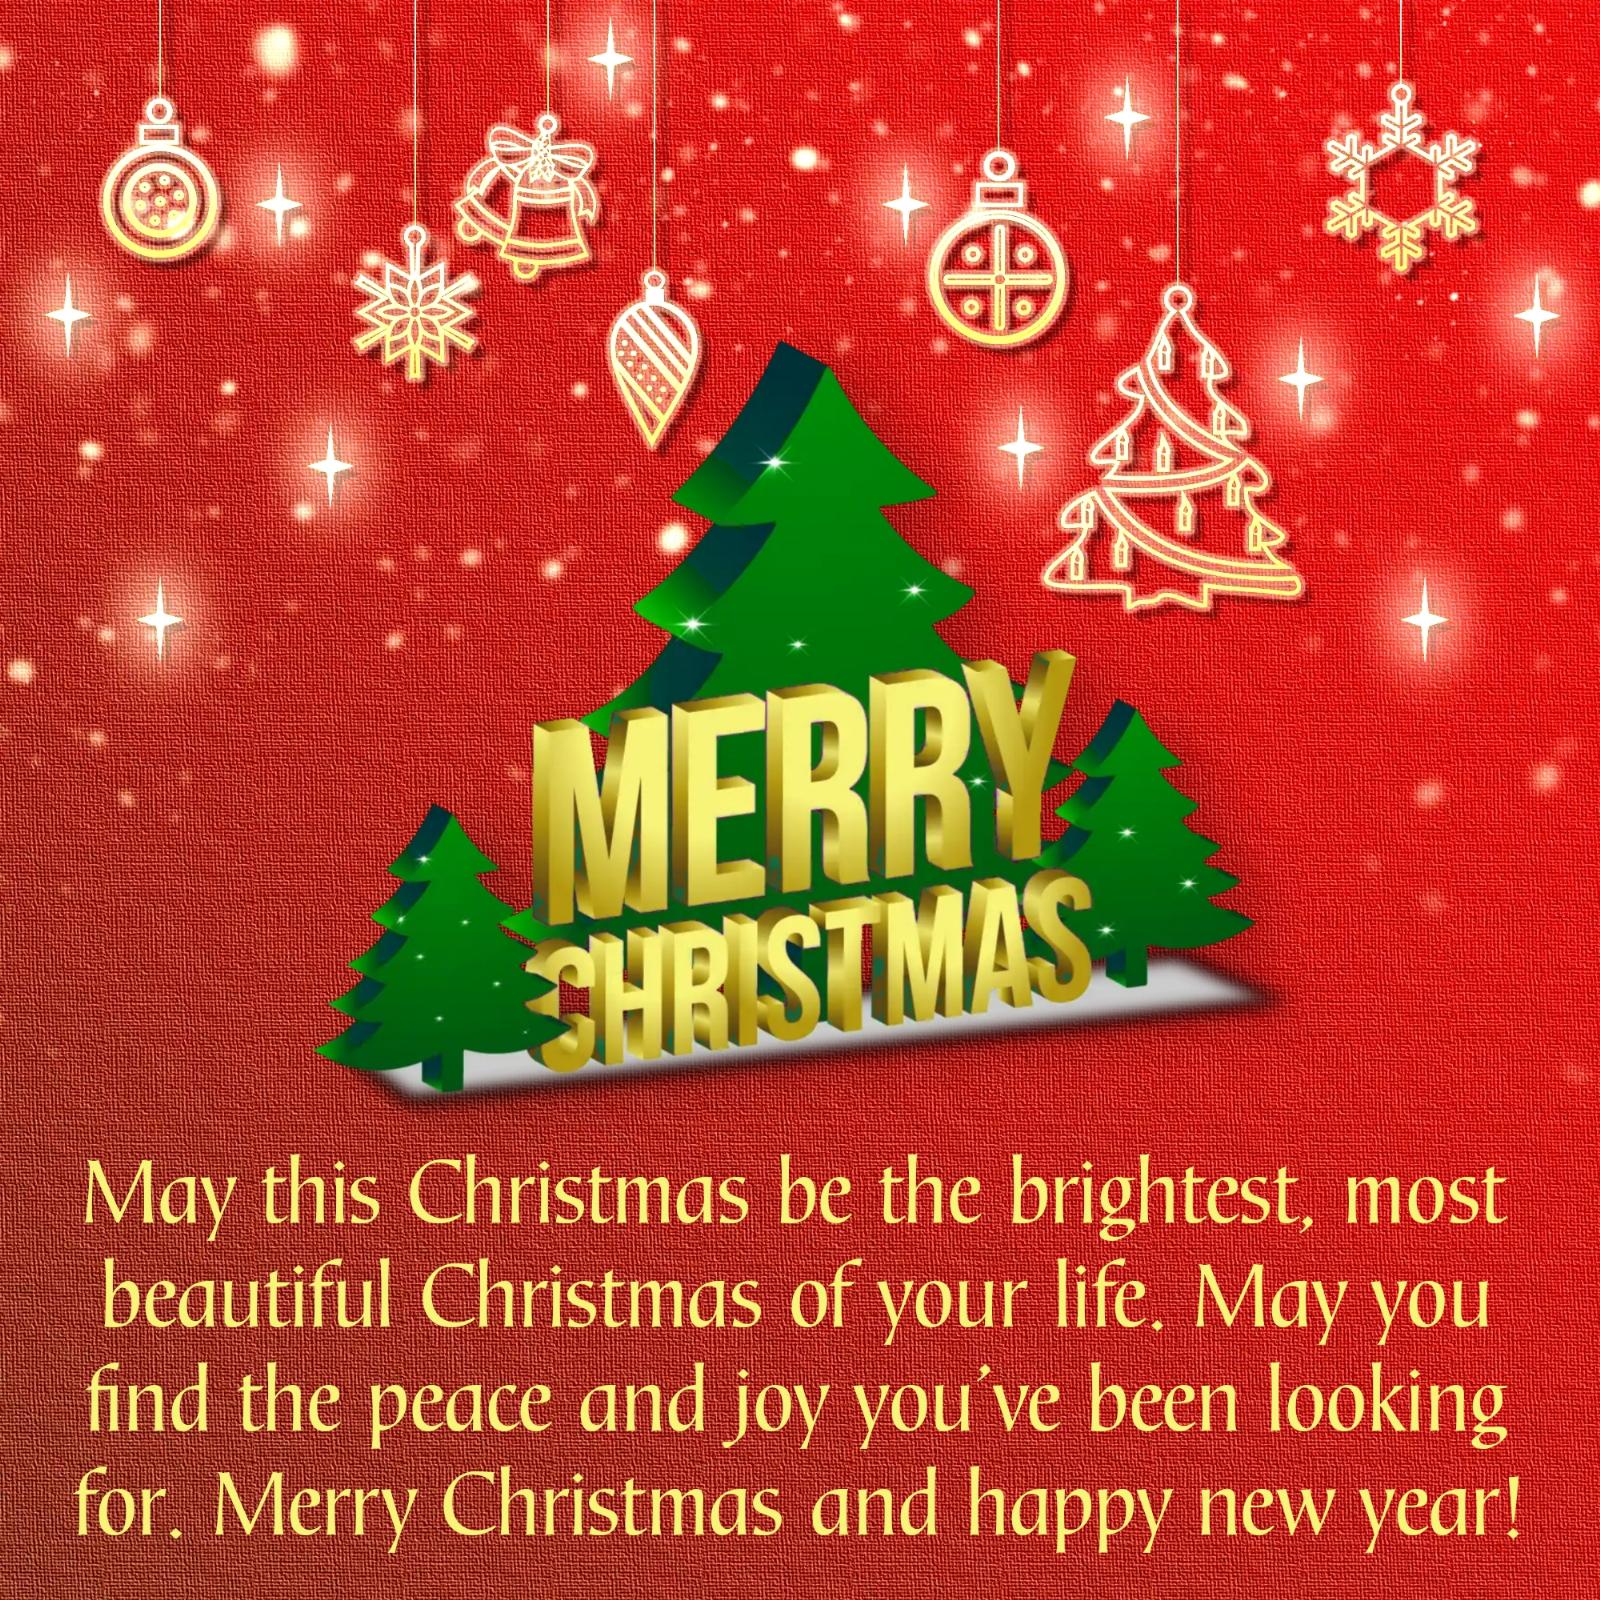 May this Christmas be the brightest most beautiful Christmas